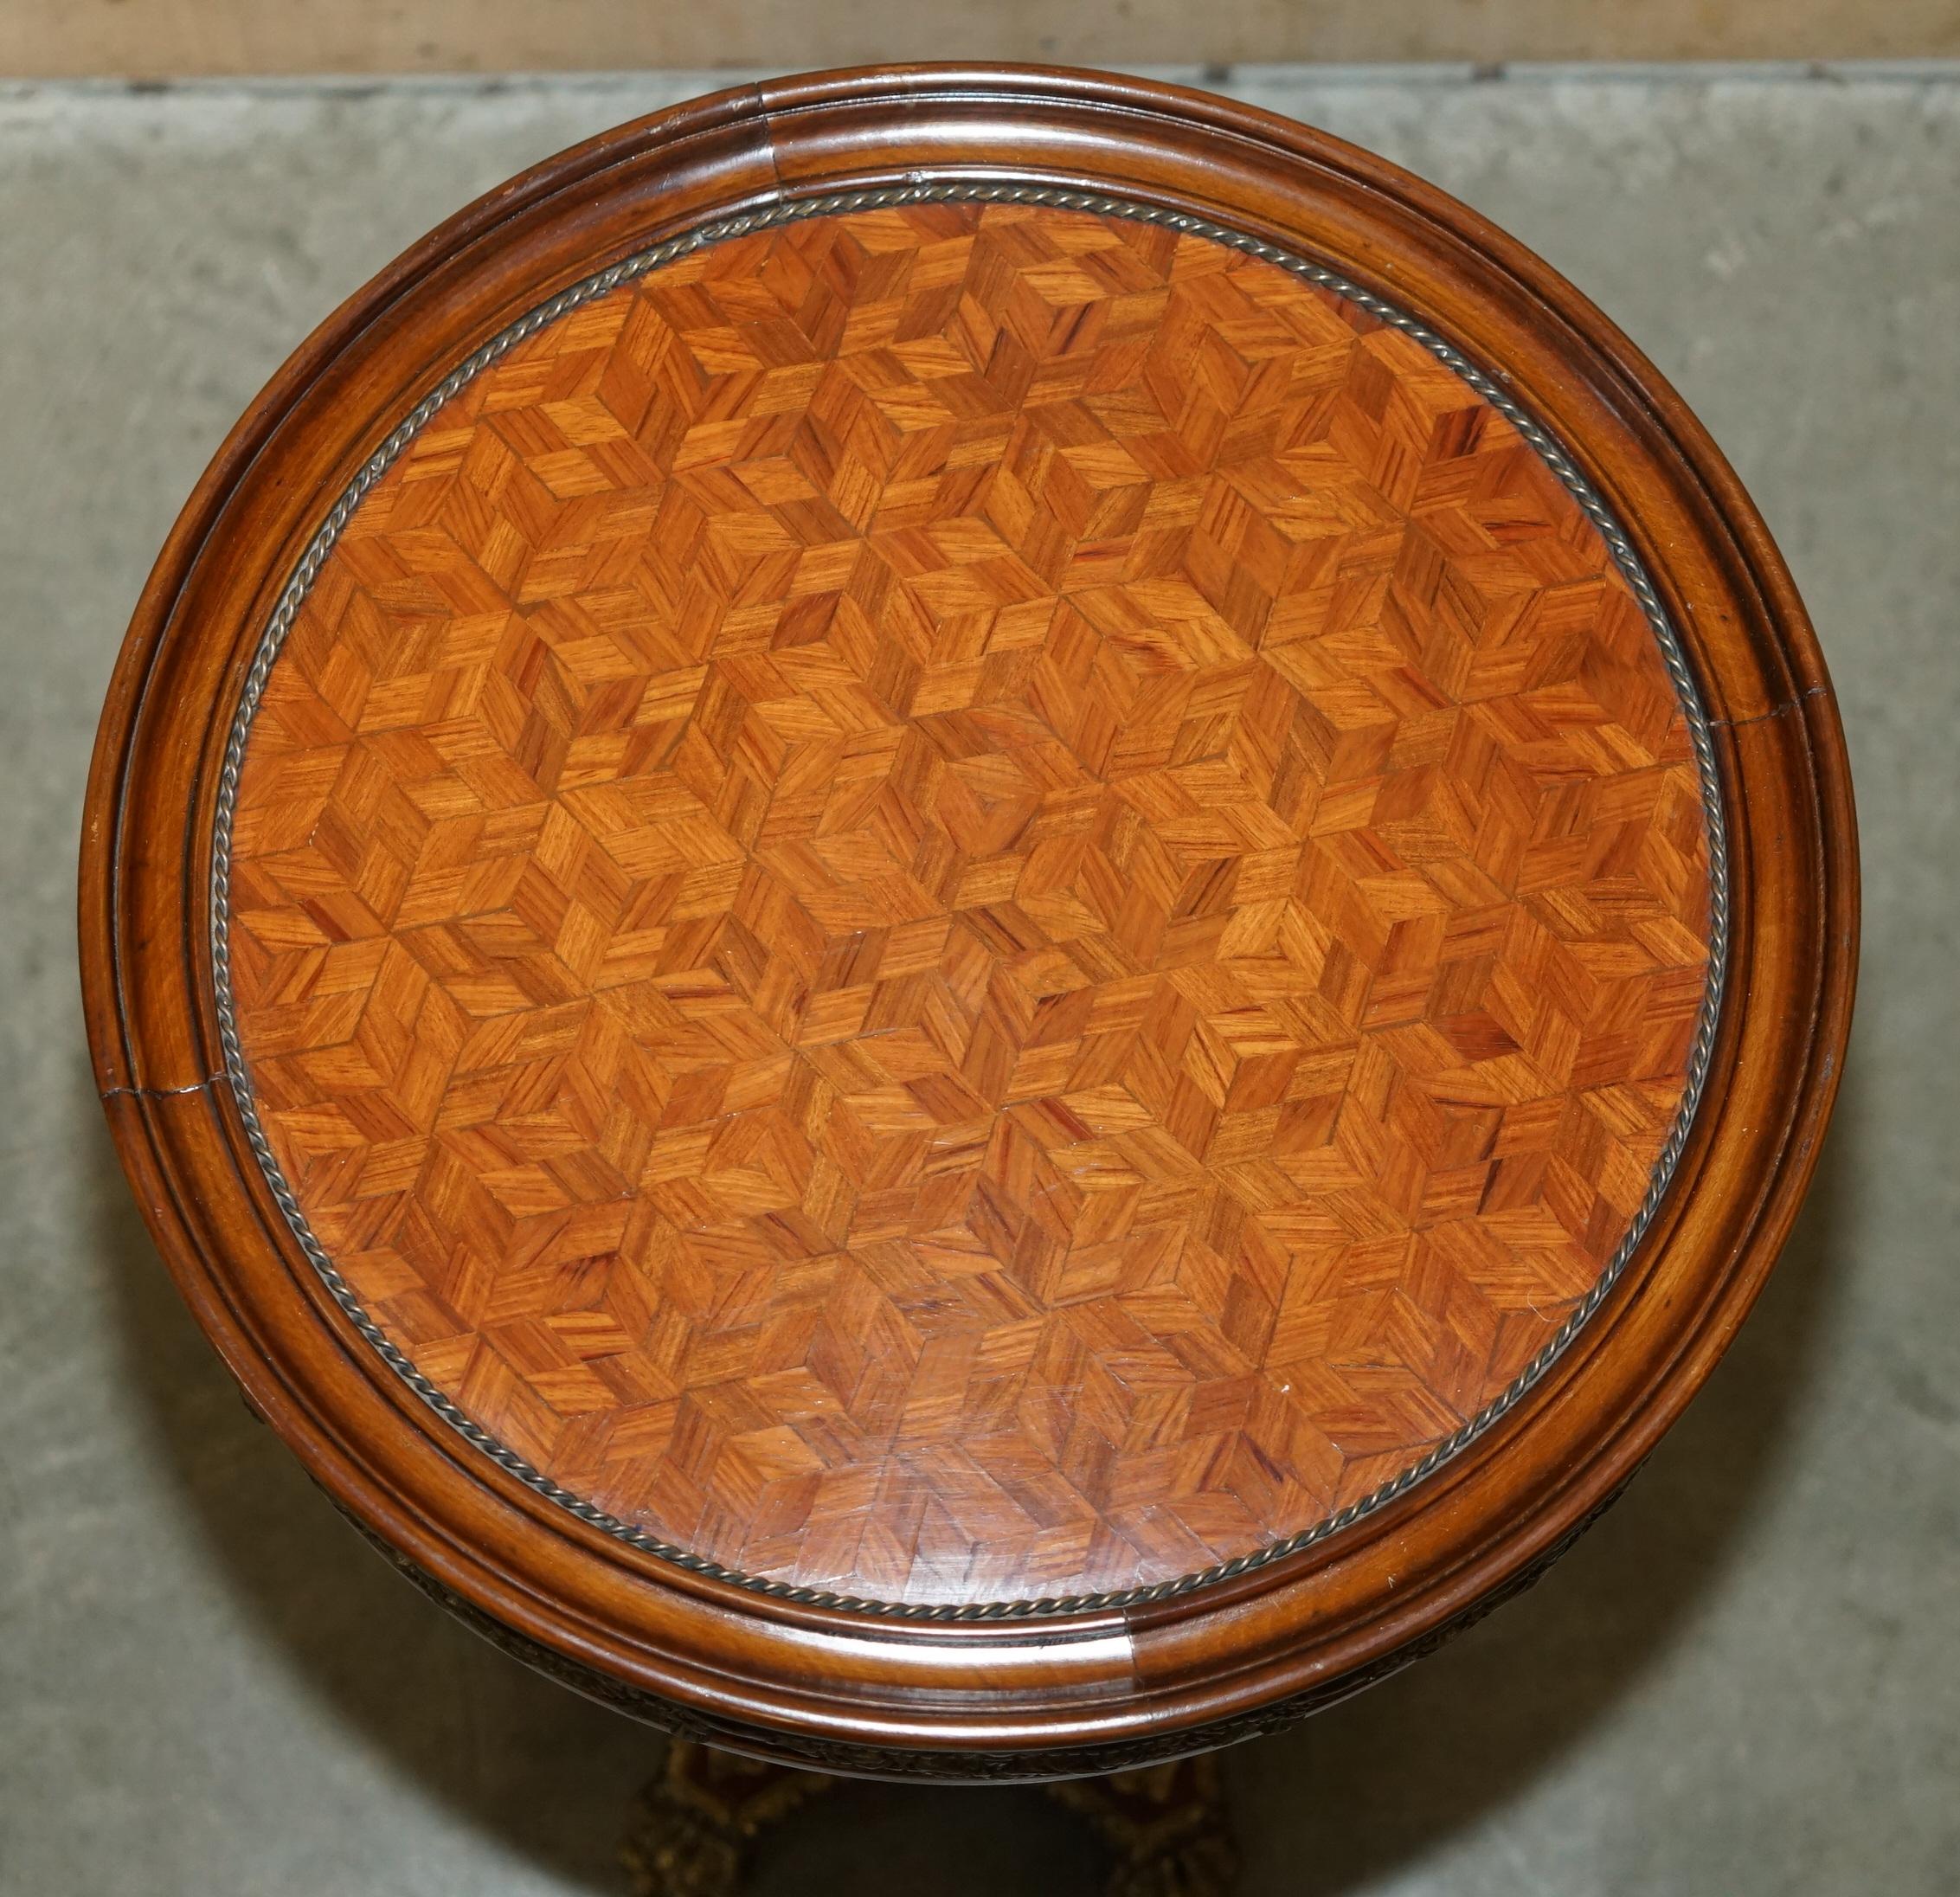 LOVELY PAiR OF FRENCH PARQUEtry WALNUT & GILT BRASS ROUND OCCASIONAL TABLES im Angebot 12